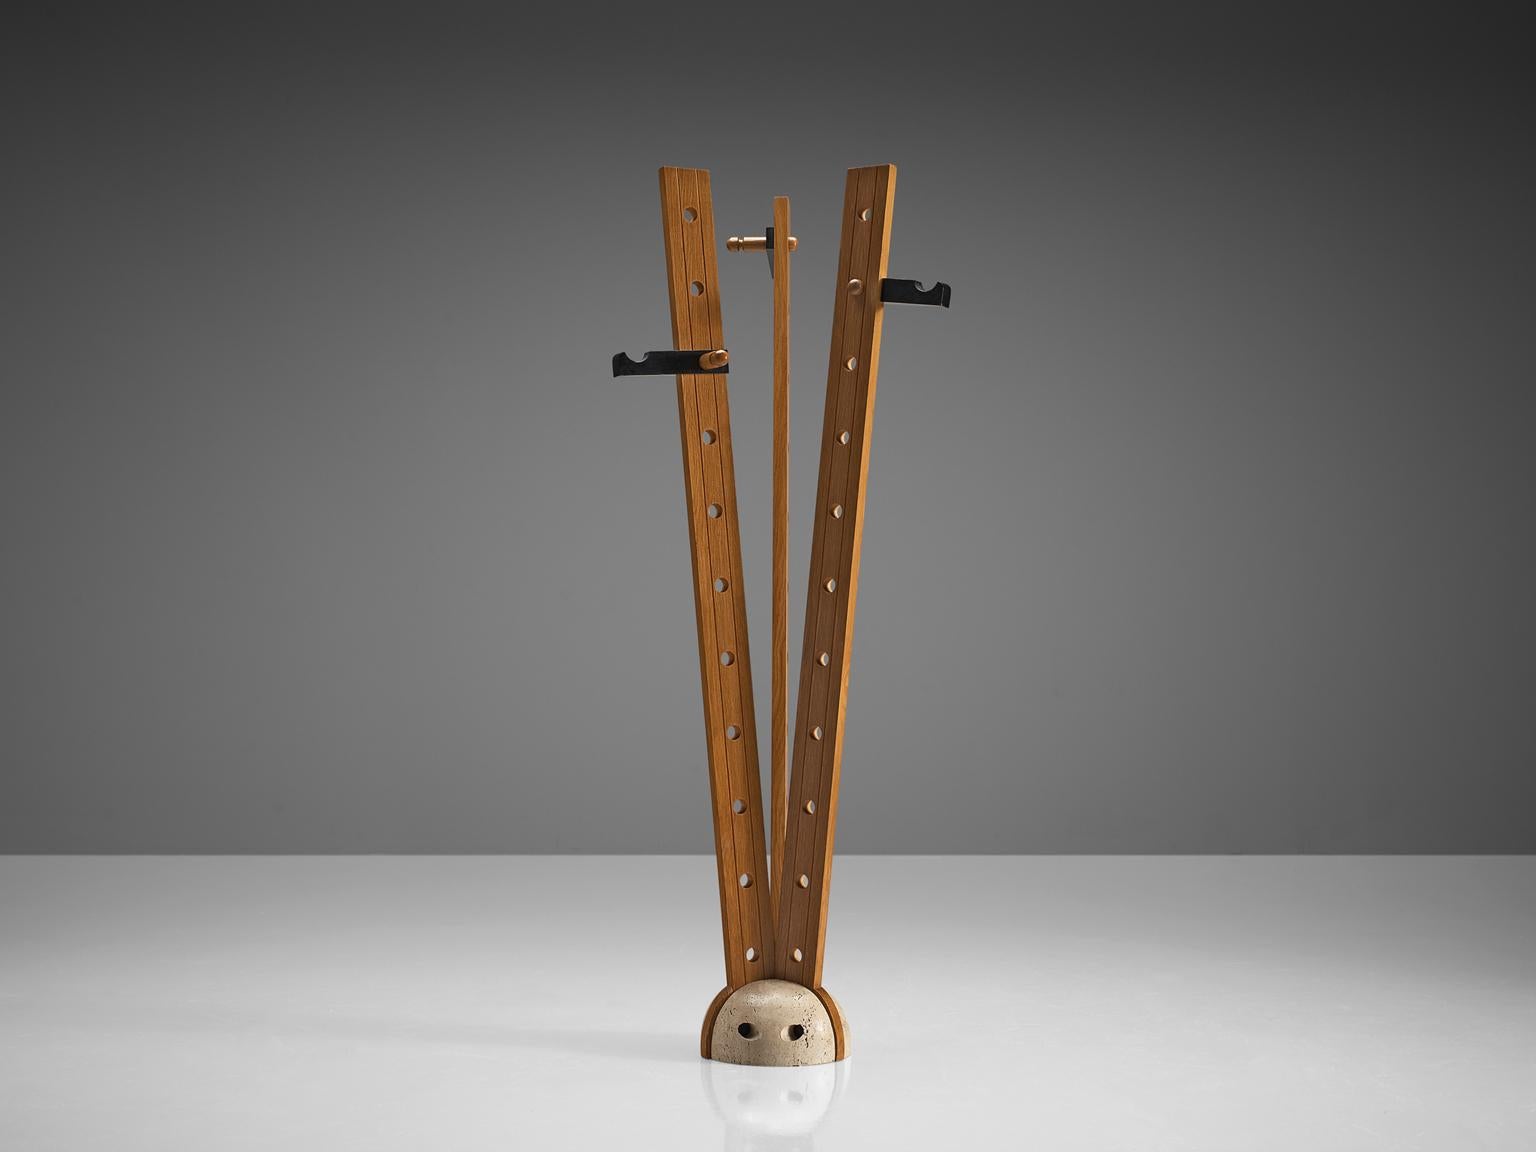 Coat rack, oak and travertine, Italy, 1970s.

This coat rack features a solid beige travertine base and three solid oak stems. The oak stems rise up from the base and each stem has eleven holes. The holes are both aesthetic and functional as the